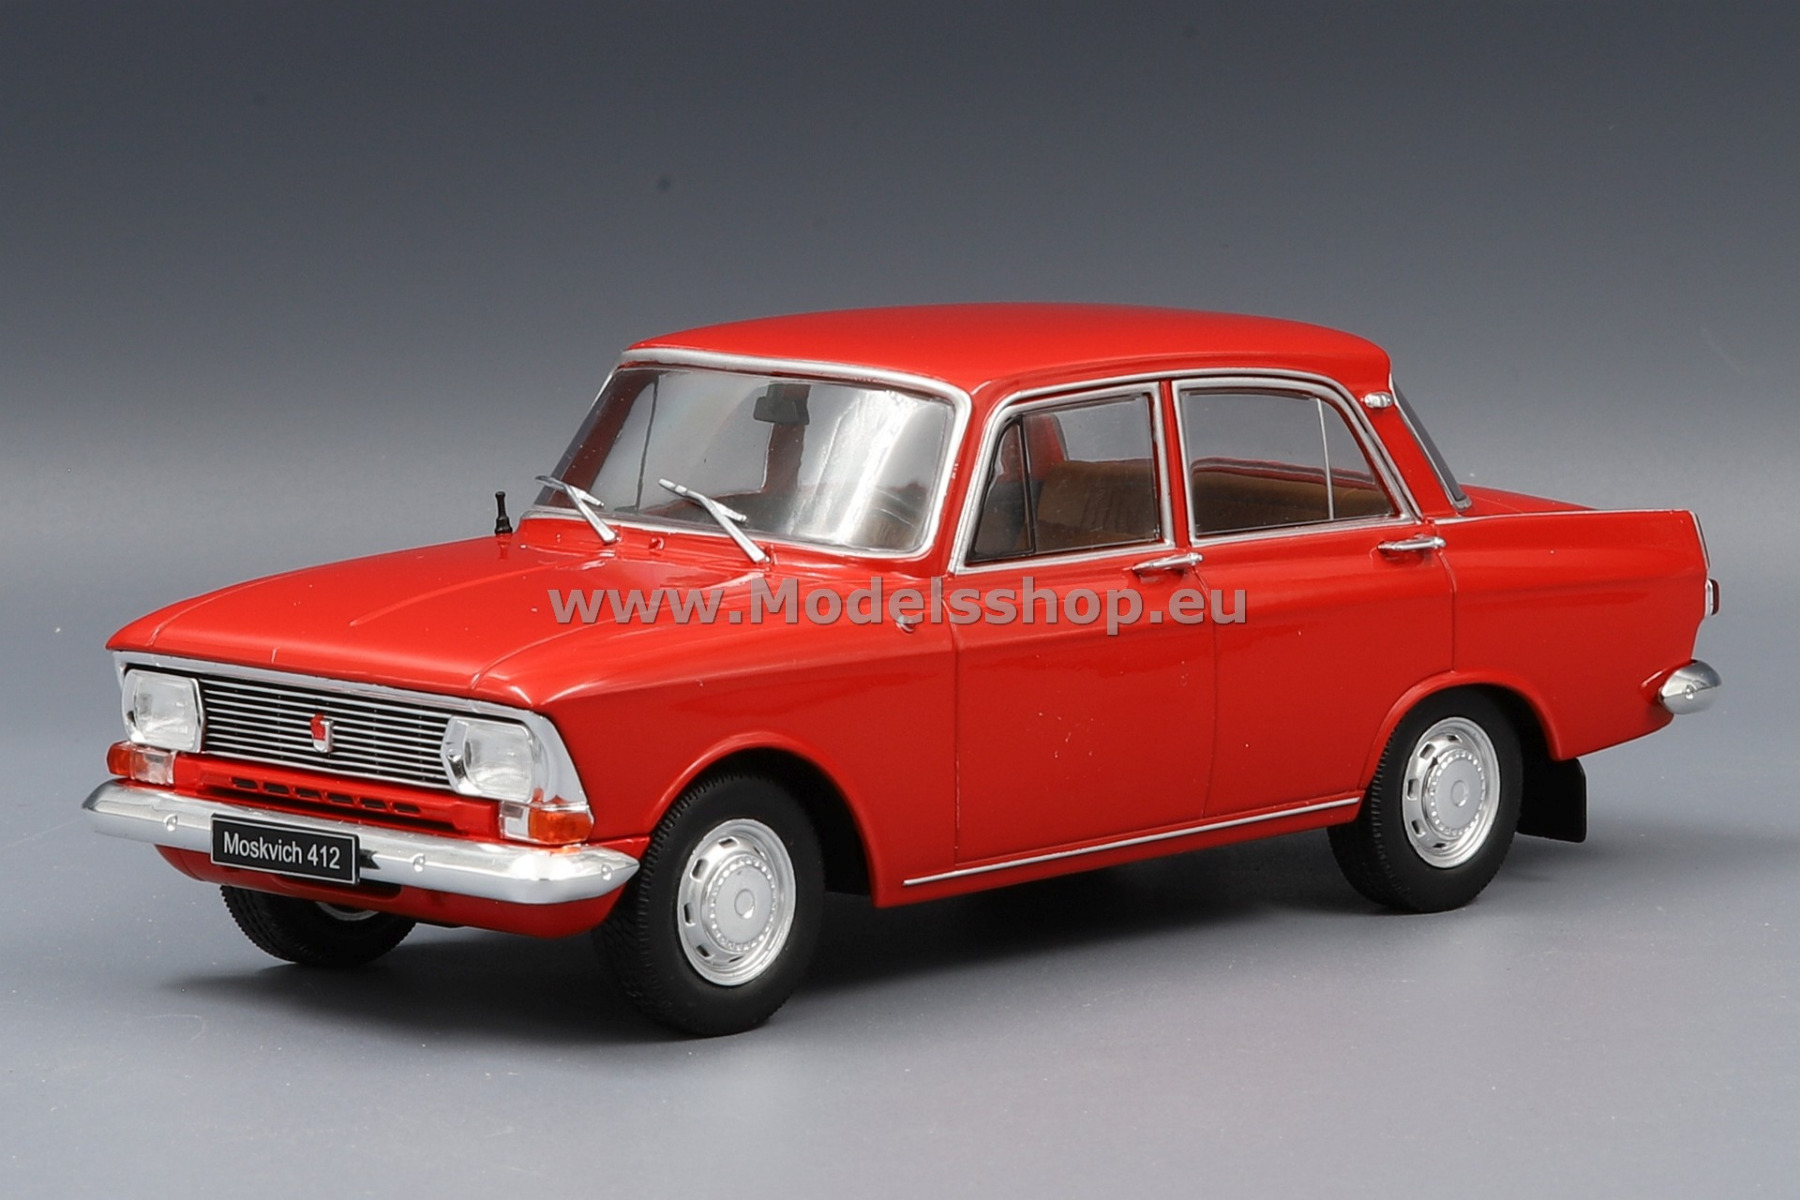 Moskvitch 412 /red/